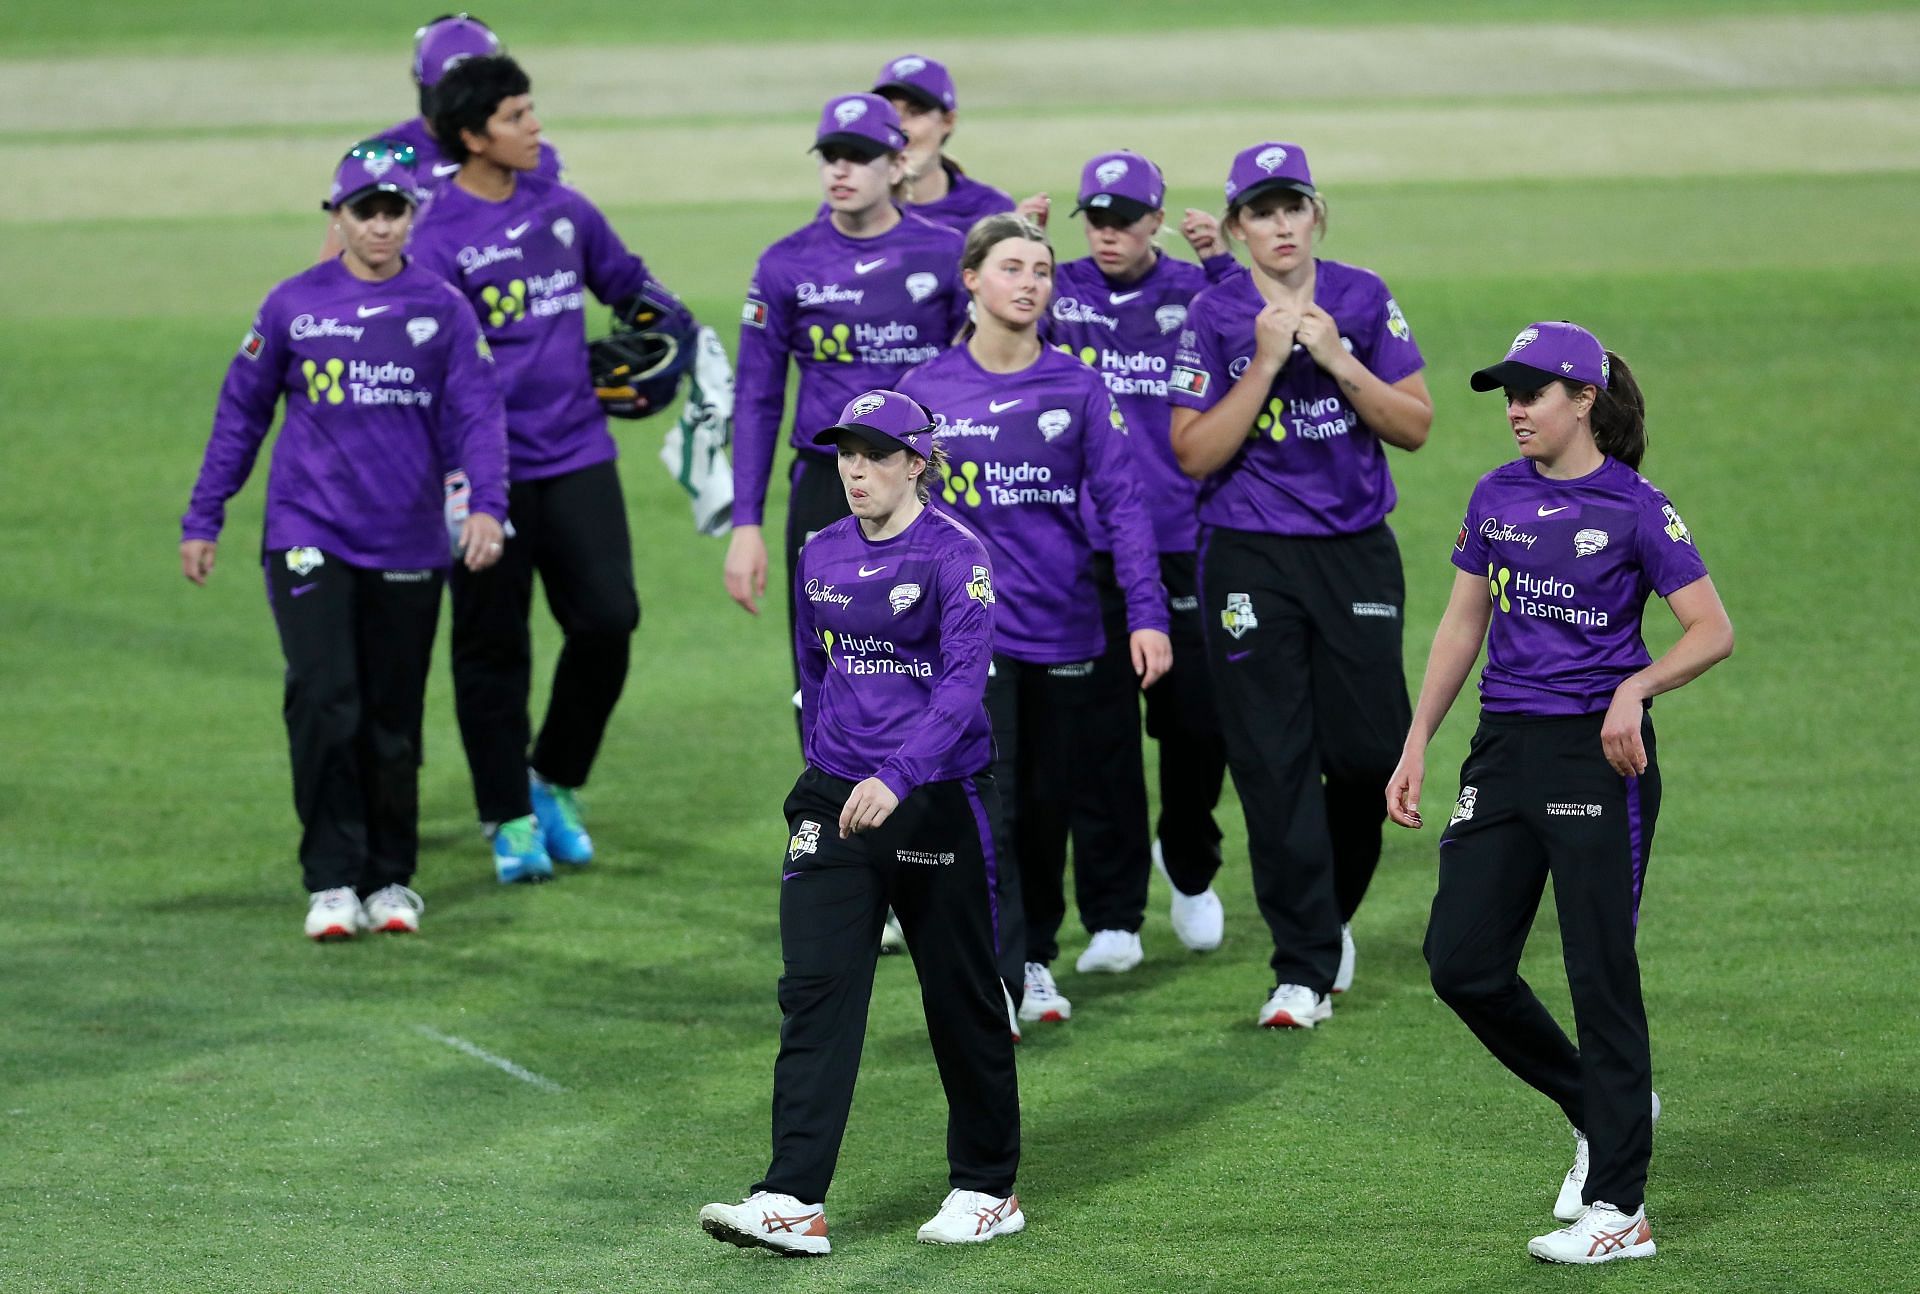 Hobart Hurricanes Women will be confident going into this encounter